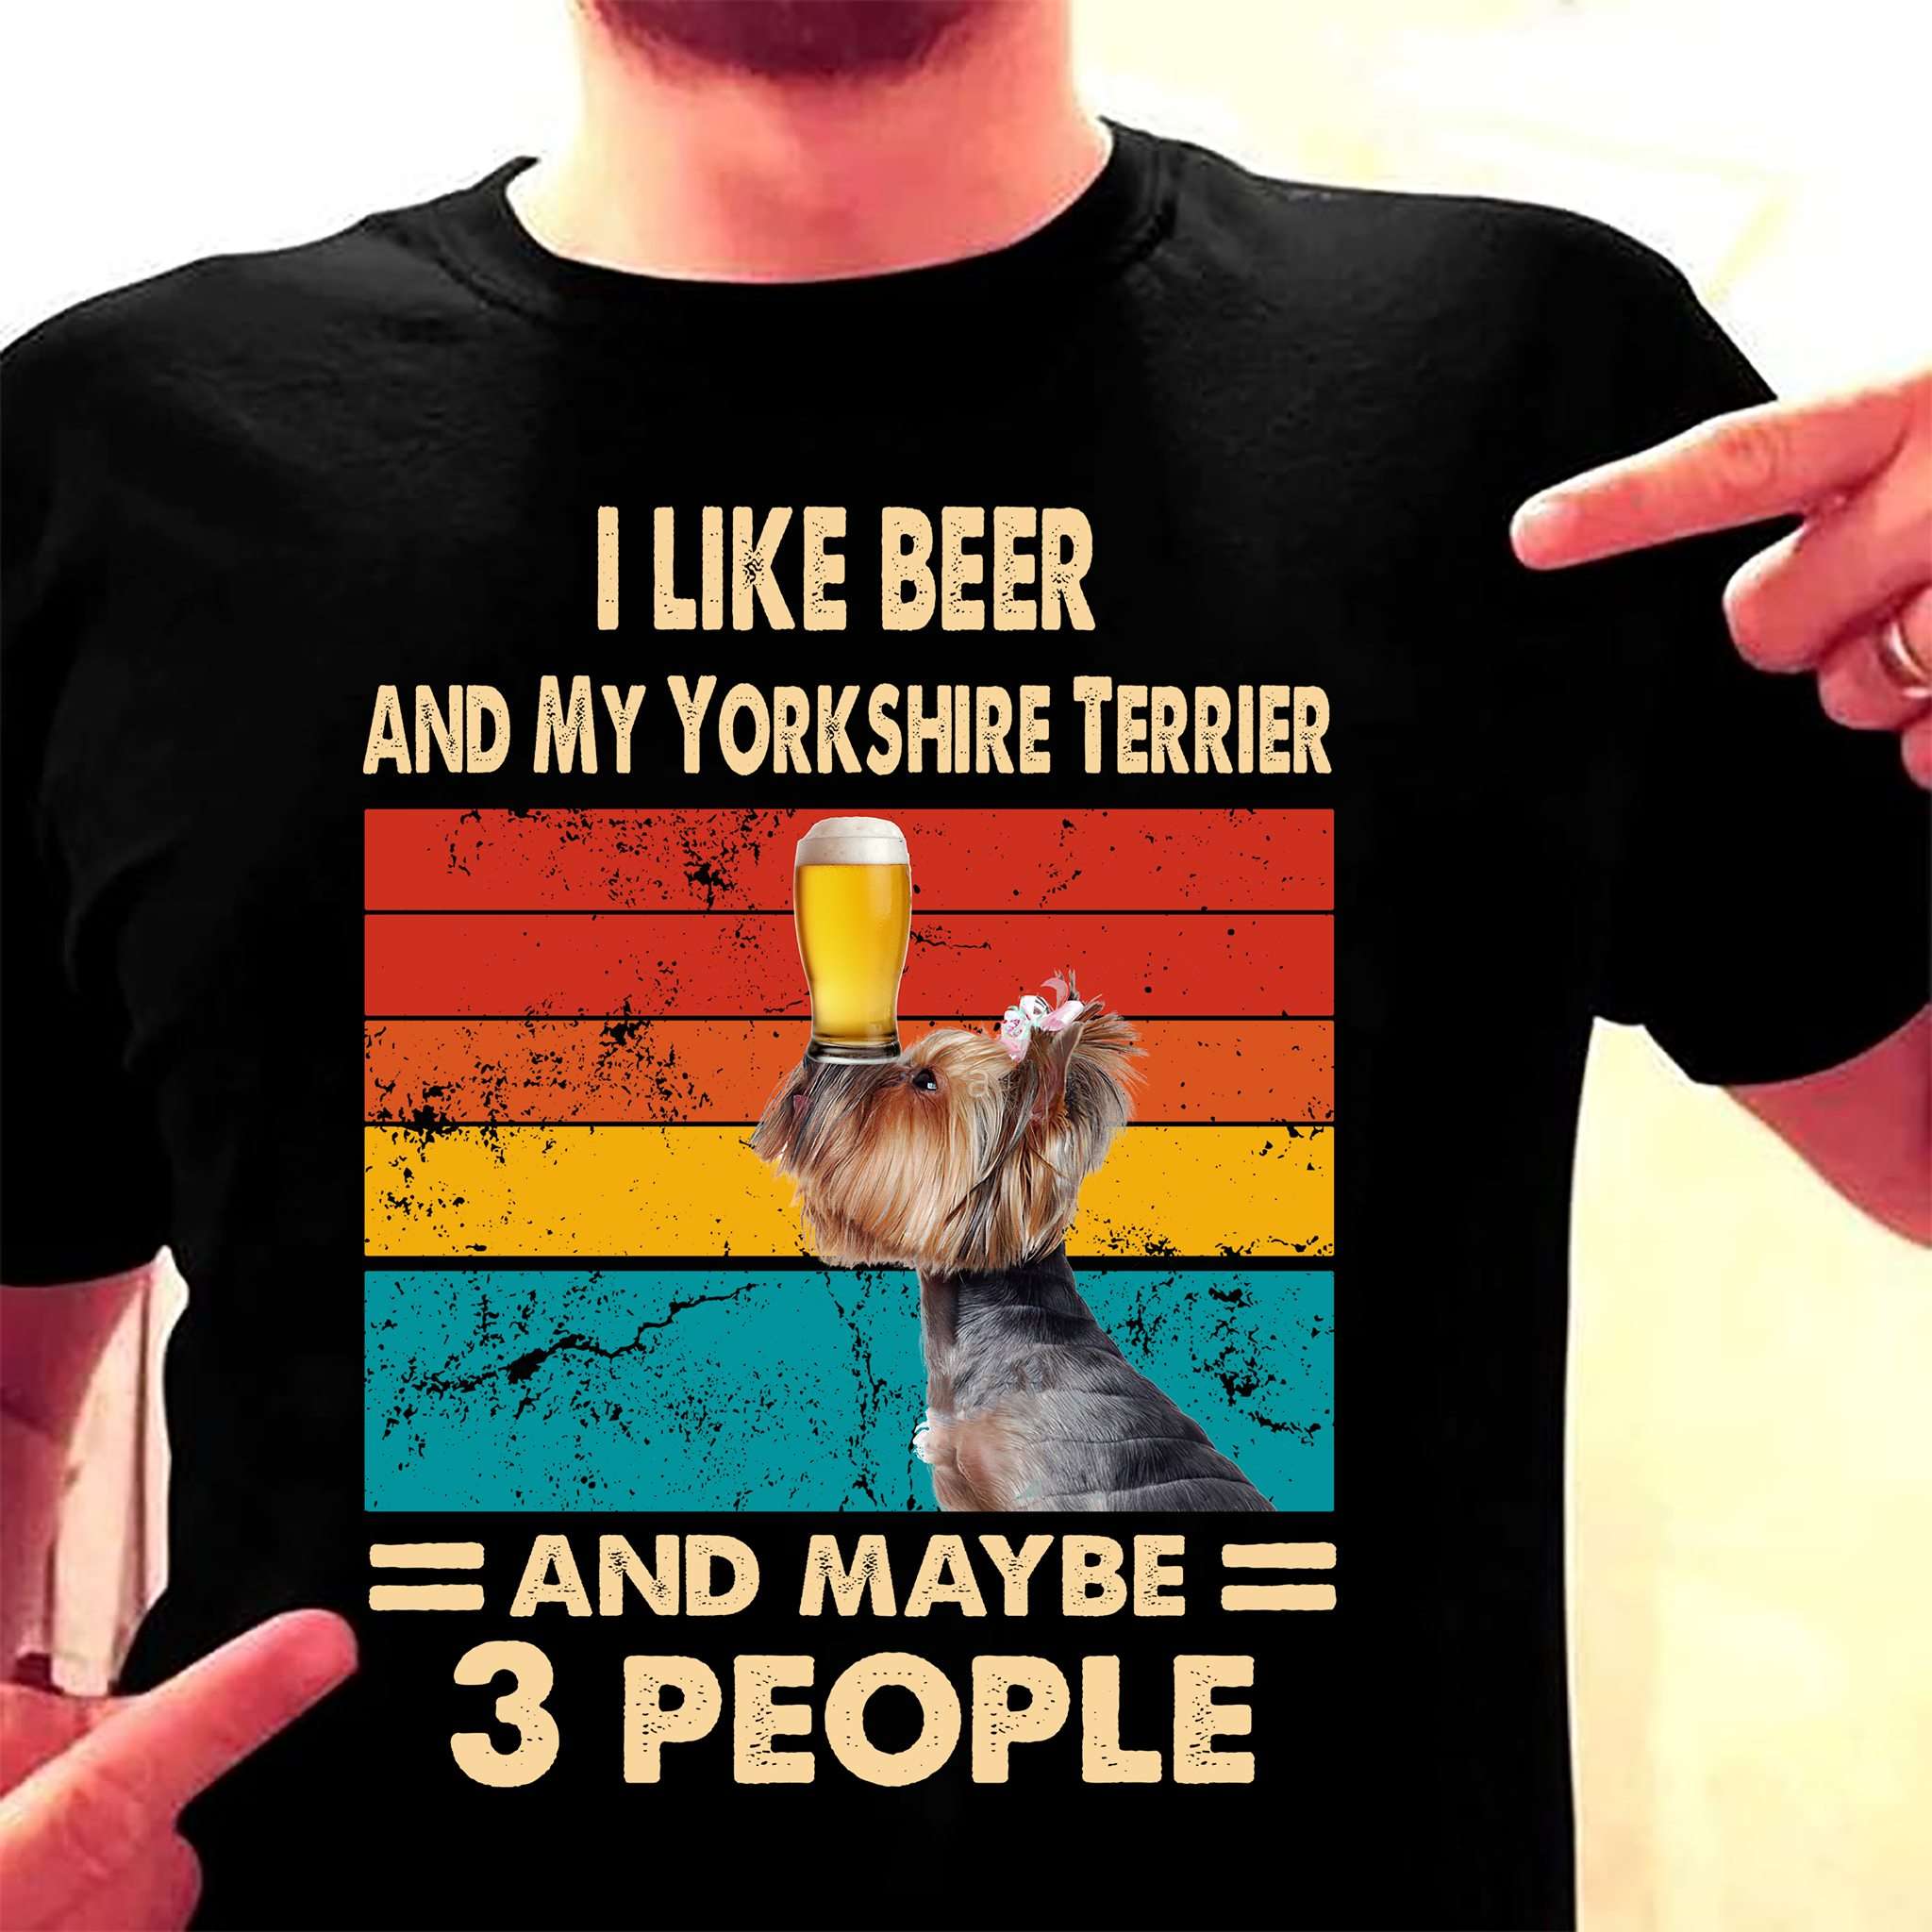 I like beer and my Yorkshire Terrier and maybe 3 people - Beer and dog